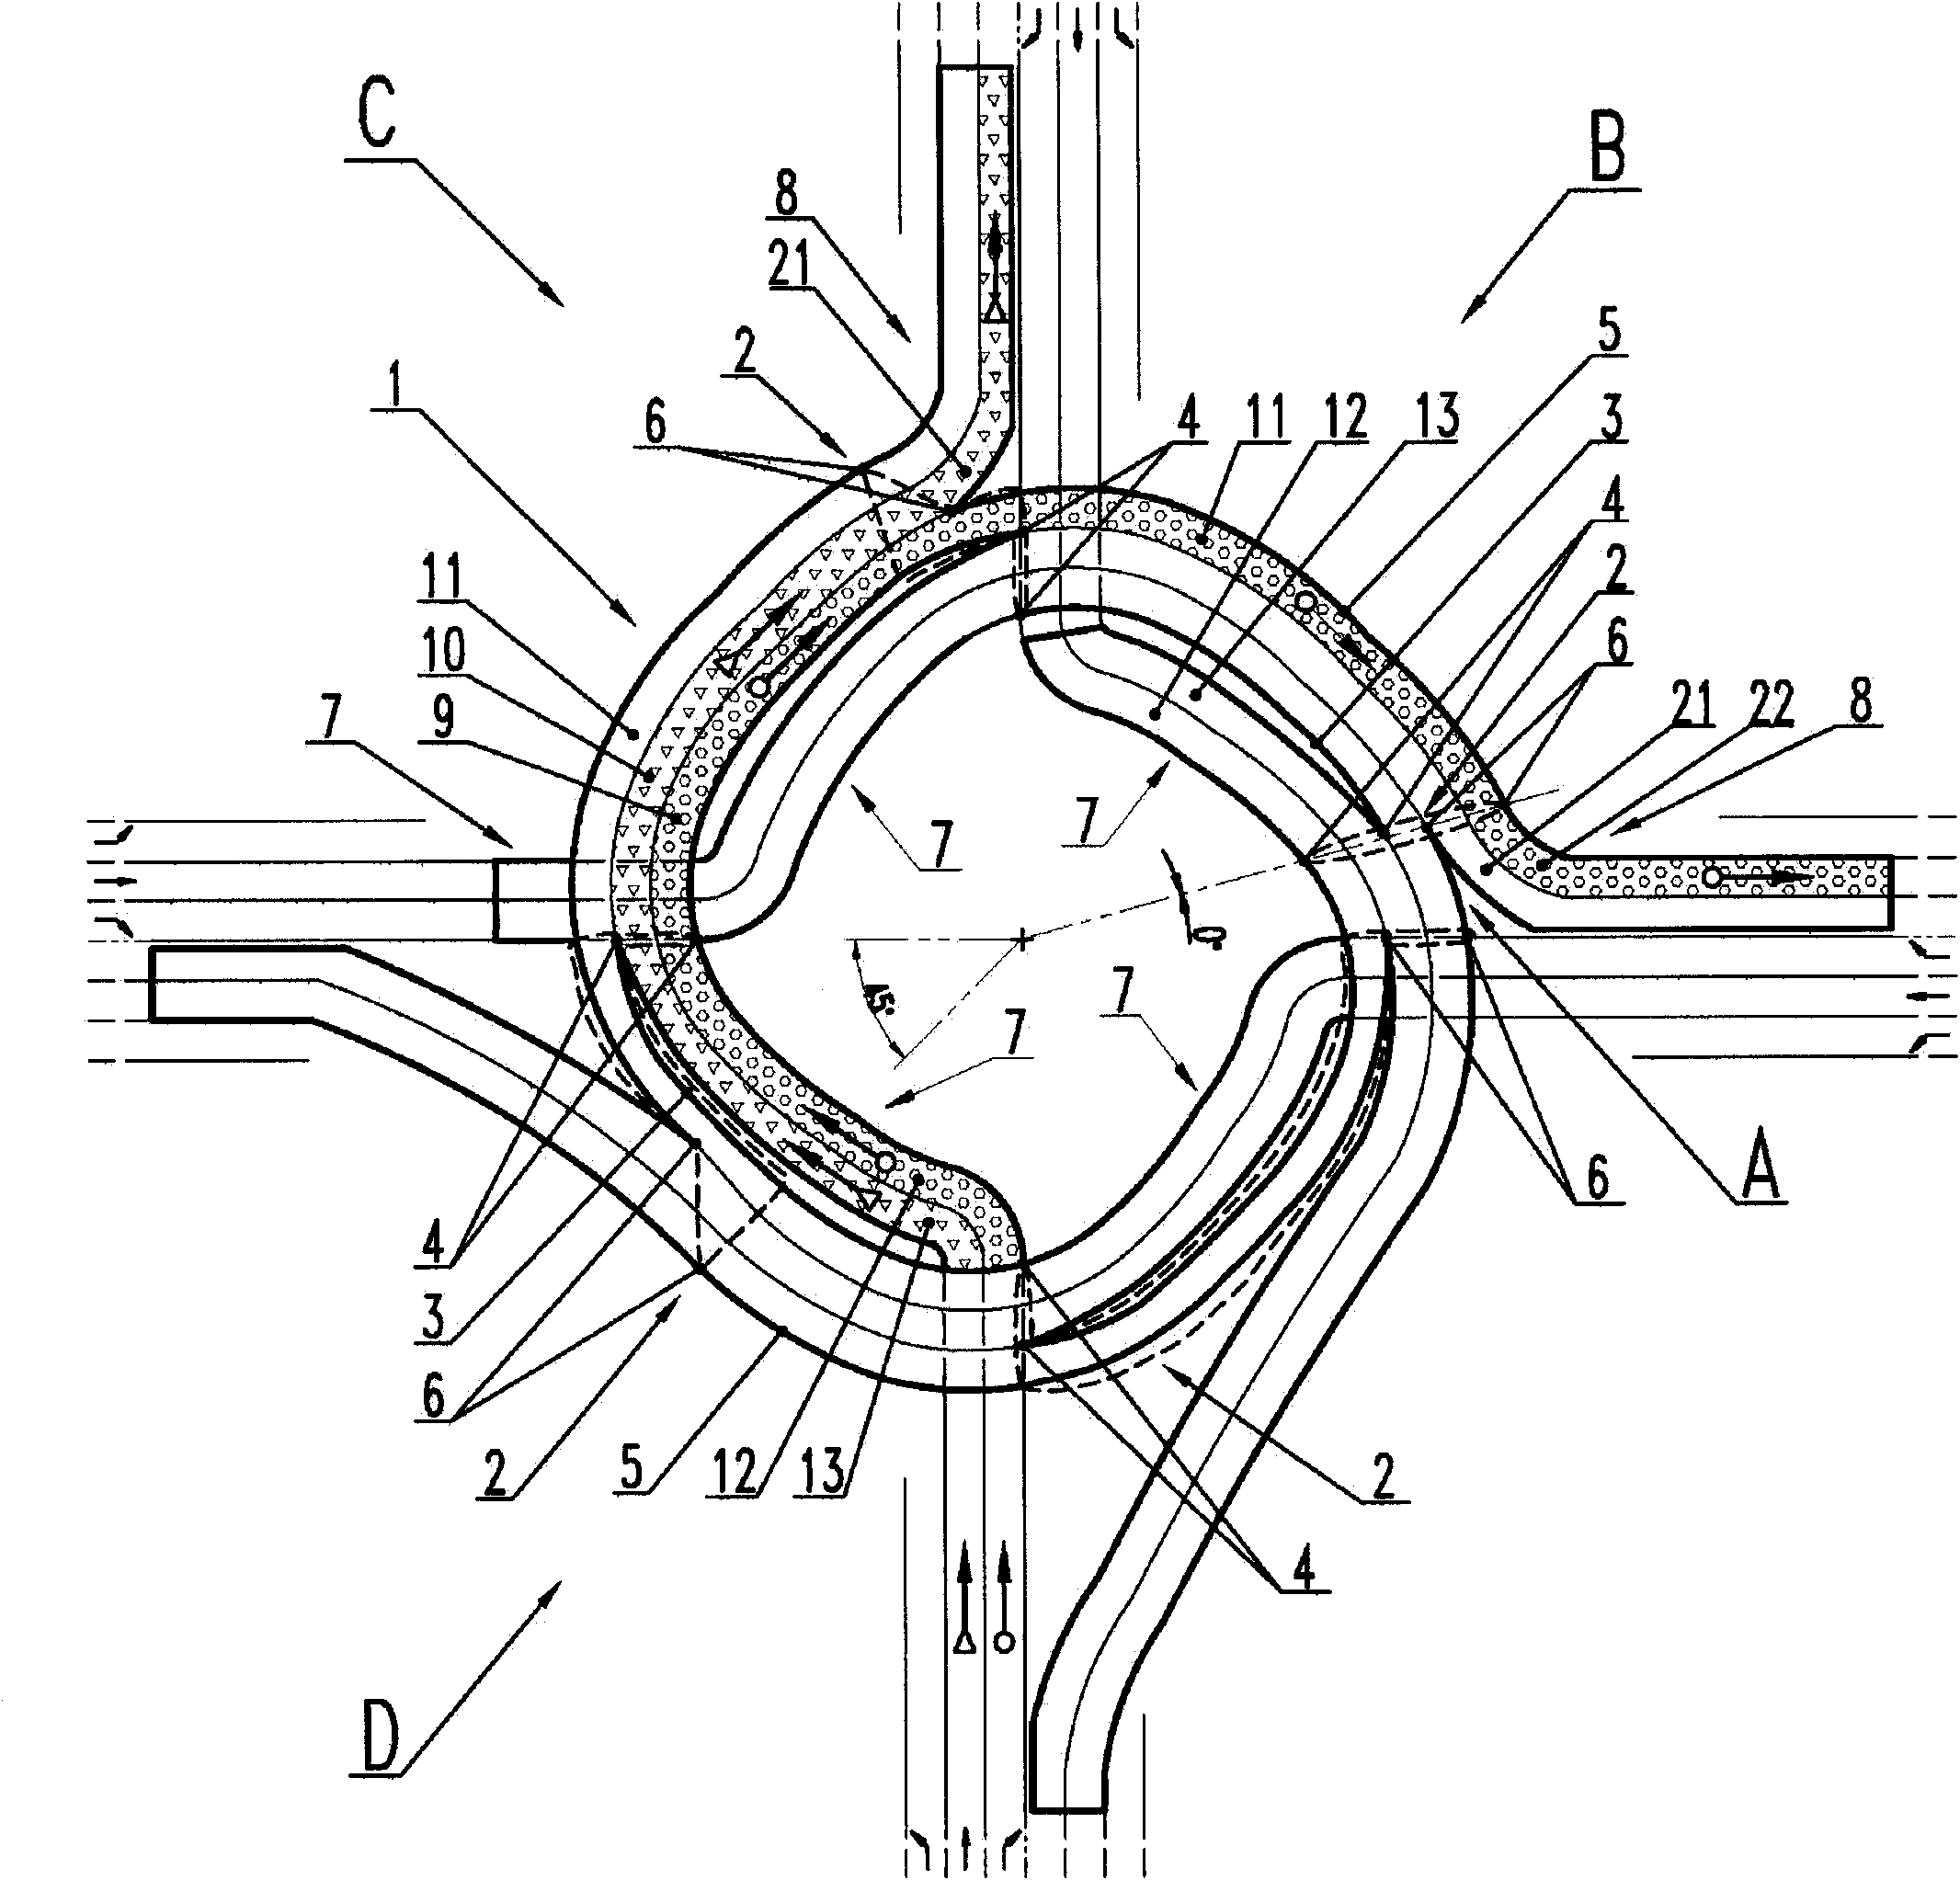 Annular flyover for straight movement and large-radius turning at crossroad